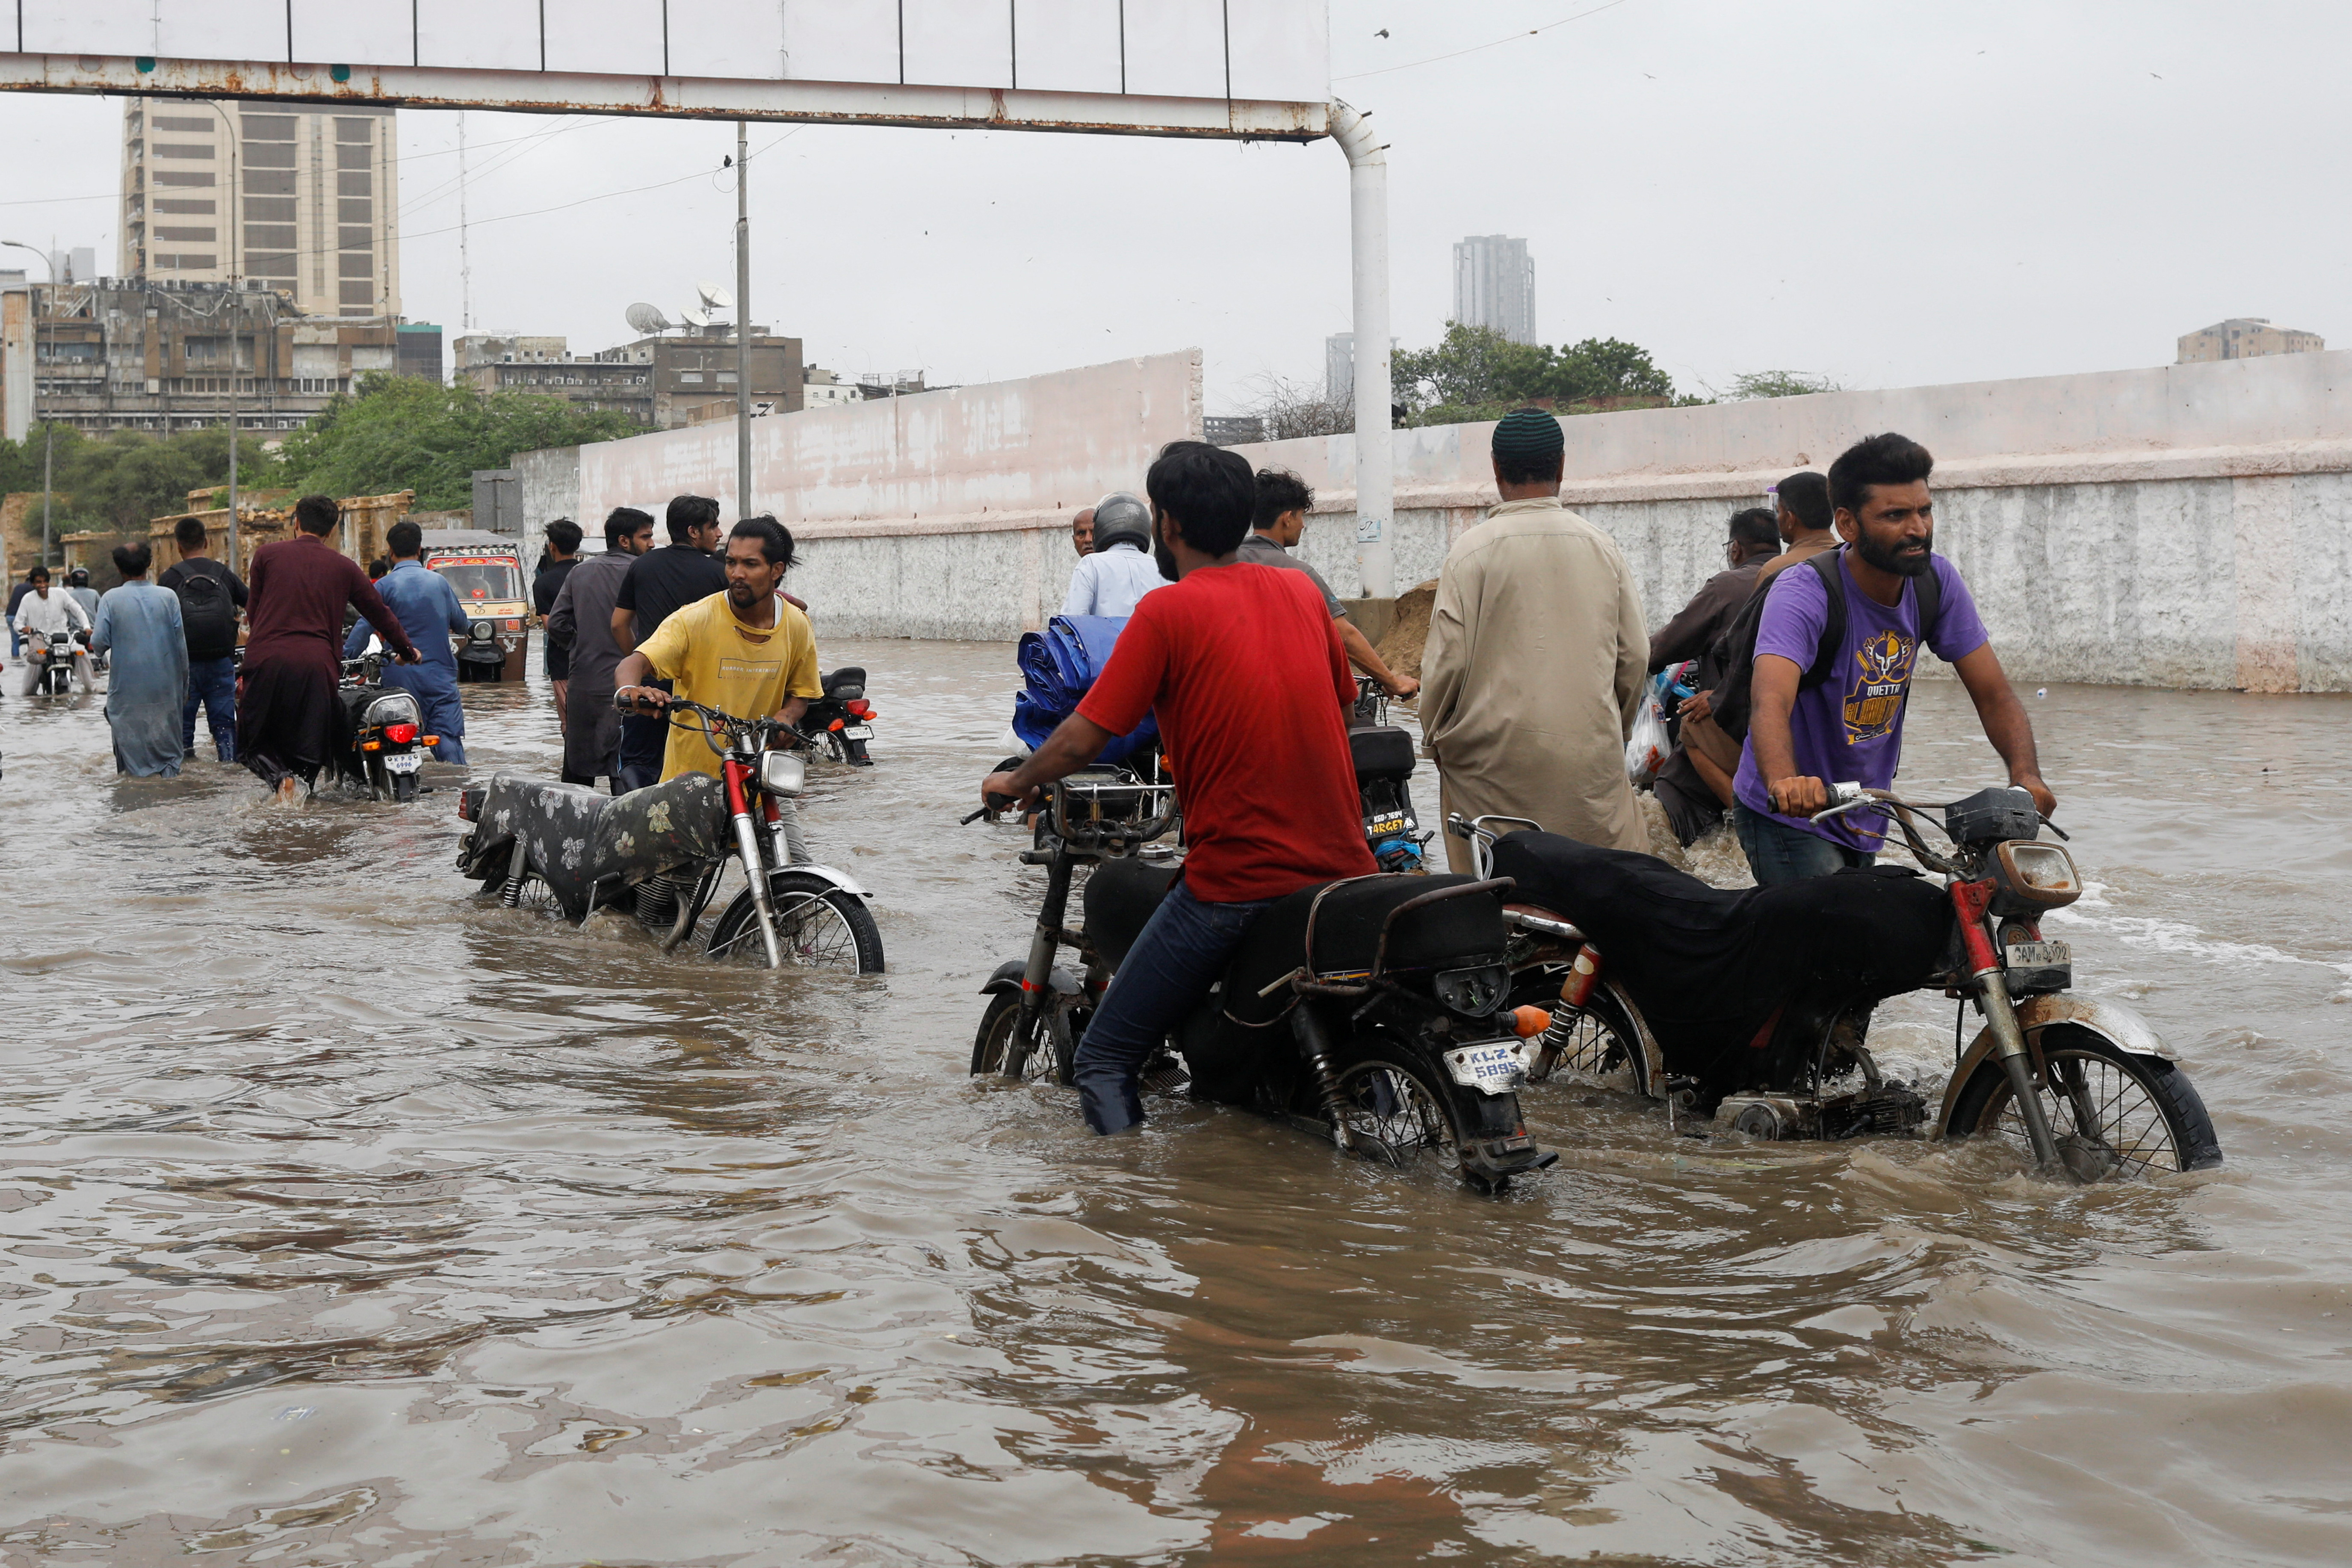 Residents commute through a flooded road during the monsoon season, in Karachi